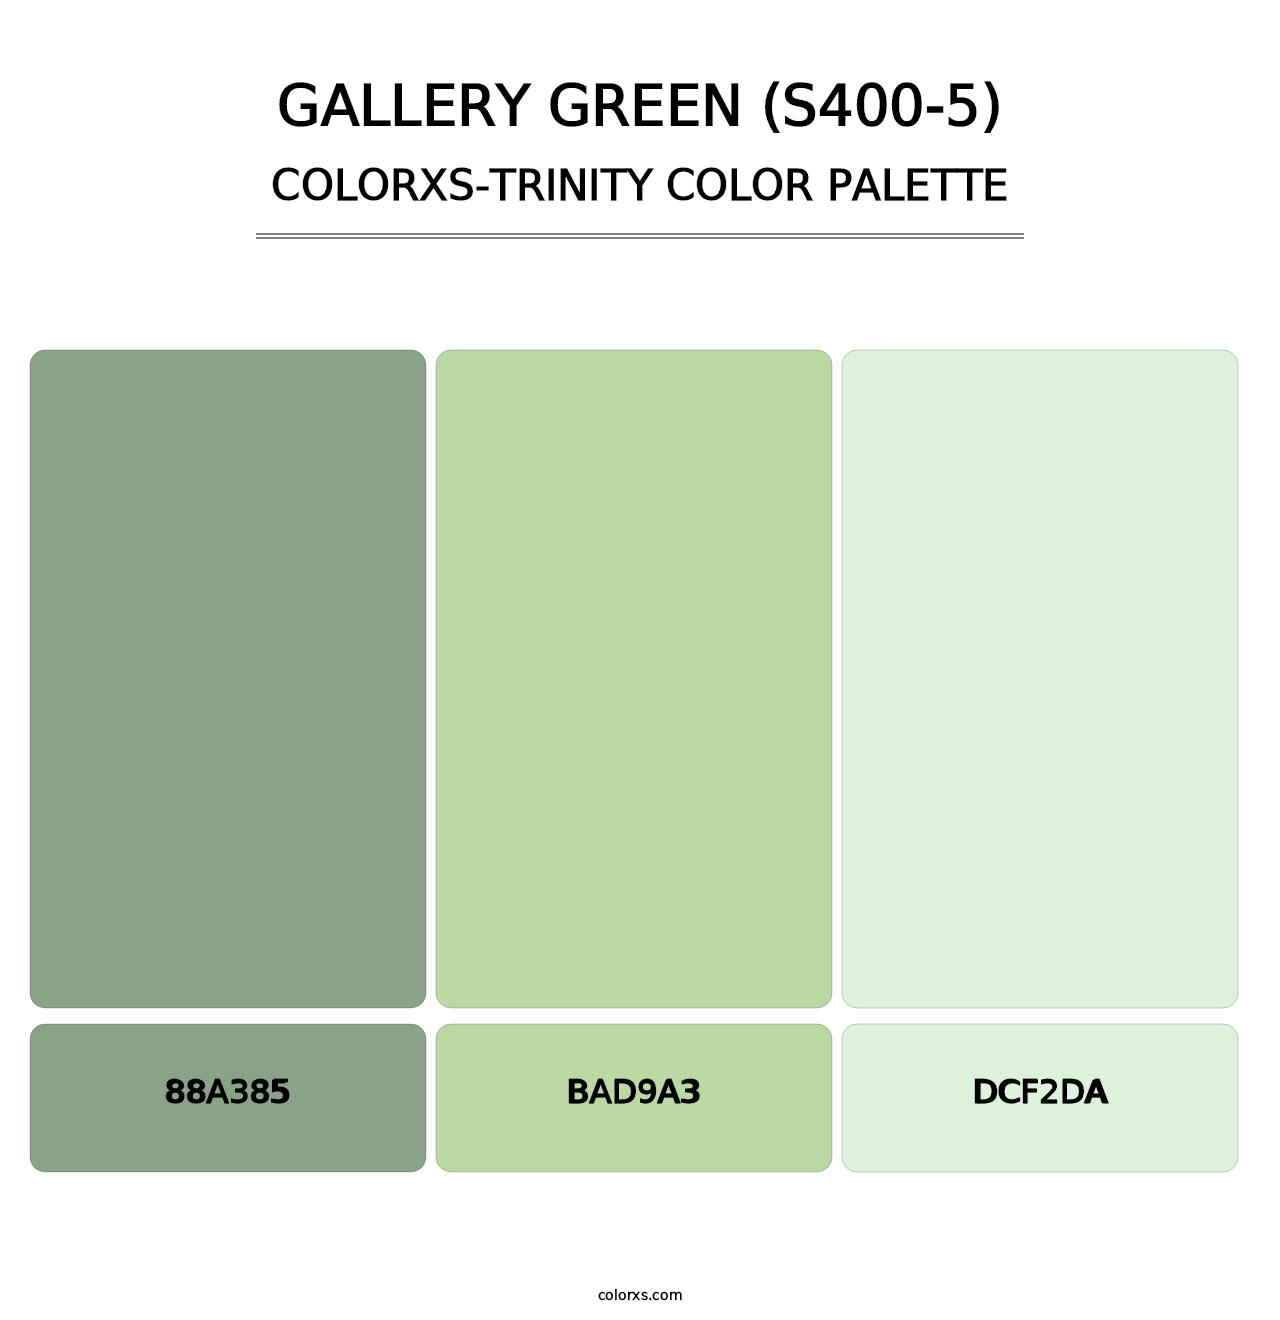 Gallery Green (S400-5) - Colorxs Trinity Palette